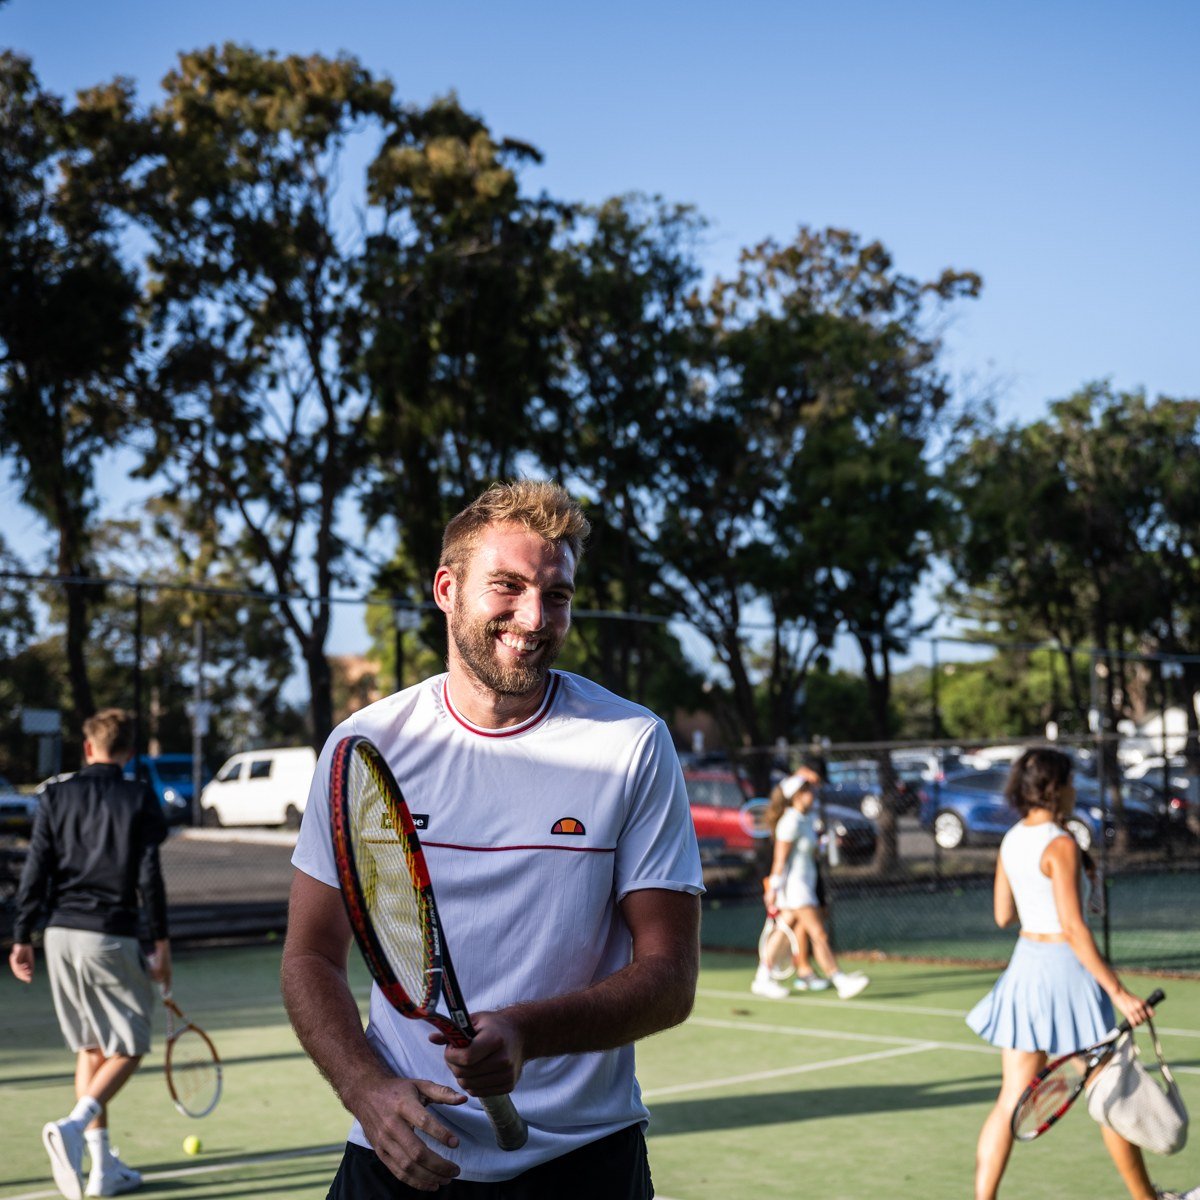 Keen to play more social tennis and meet new people?

Our partners at Discover Tennis have got you covered with their midweek program of fun games, expert coaching and so much more. Commencing May 2nd.

Check out the link in bio to learn more and boo